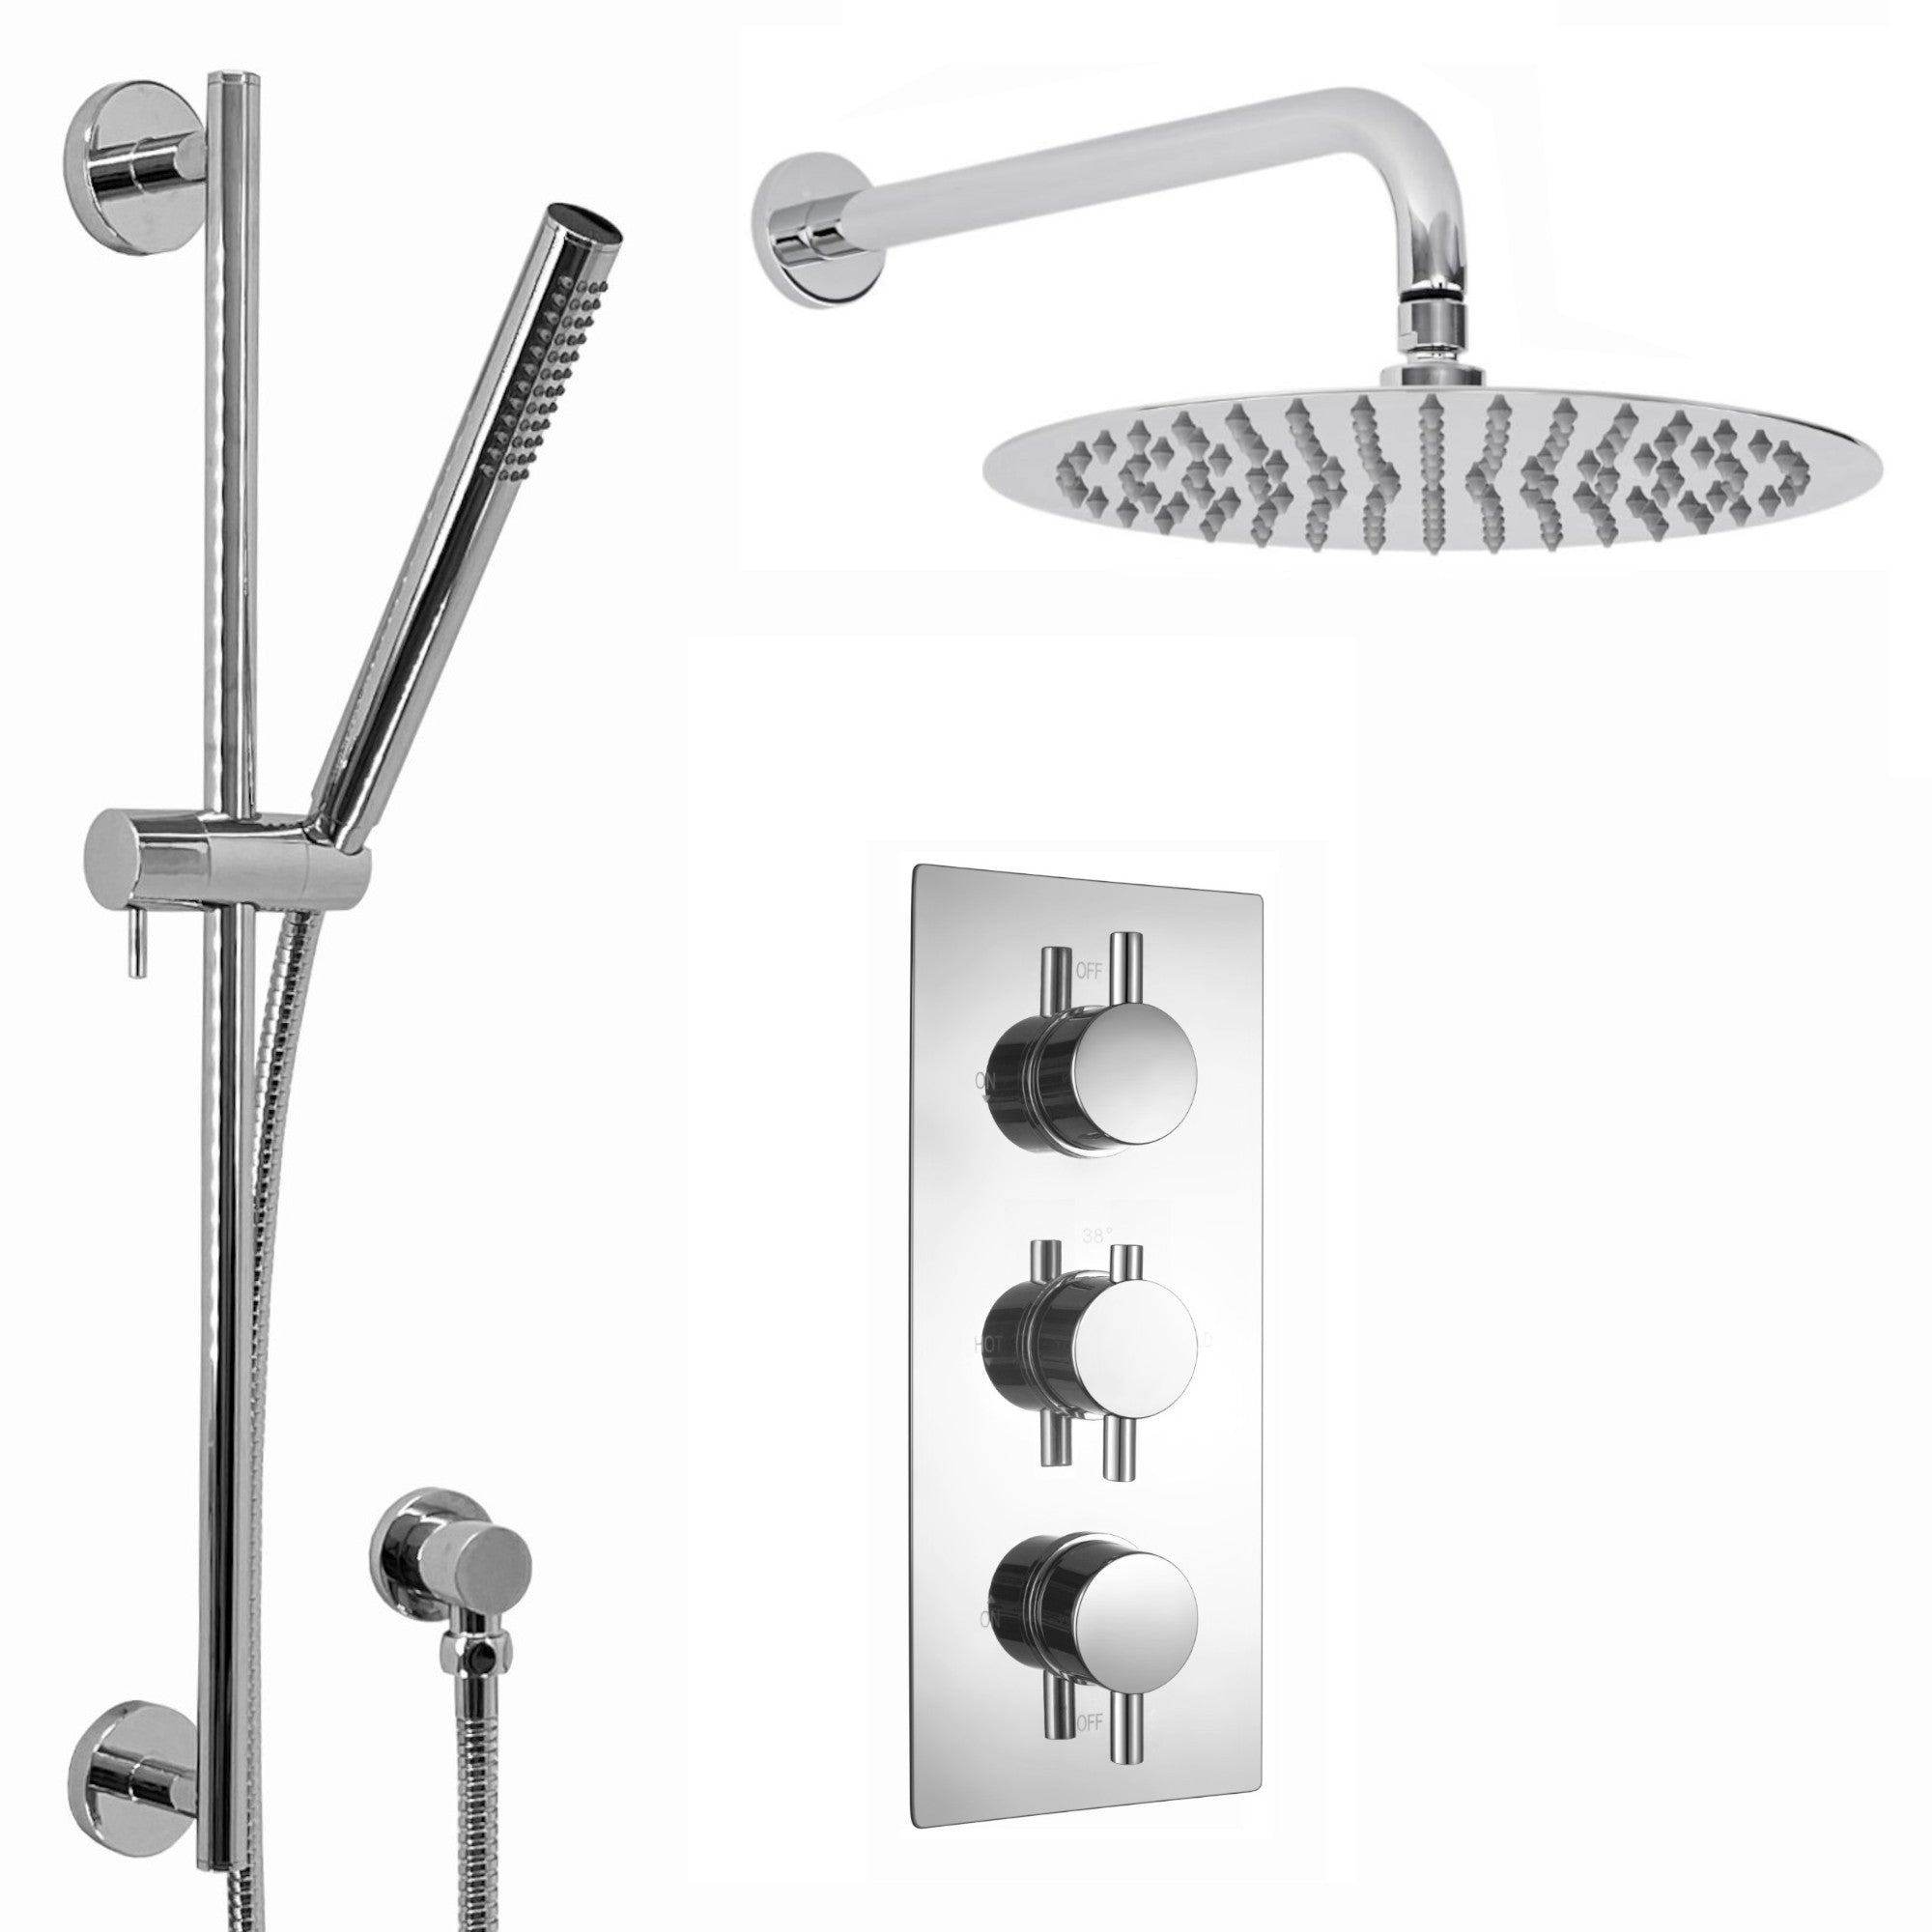 Venice Contemporary Round Concealed Thermostatic Shower Set Incl. Triple Valve, Wall Fixed 8" Shower Head, Slider Rail Kit - Chrome (2 Outlet)